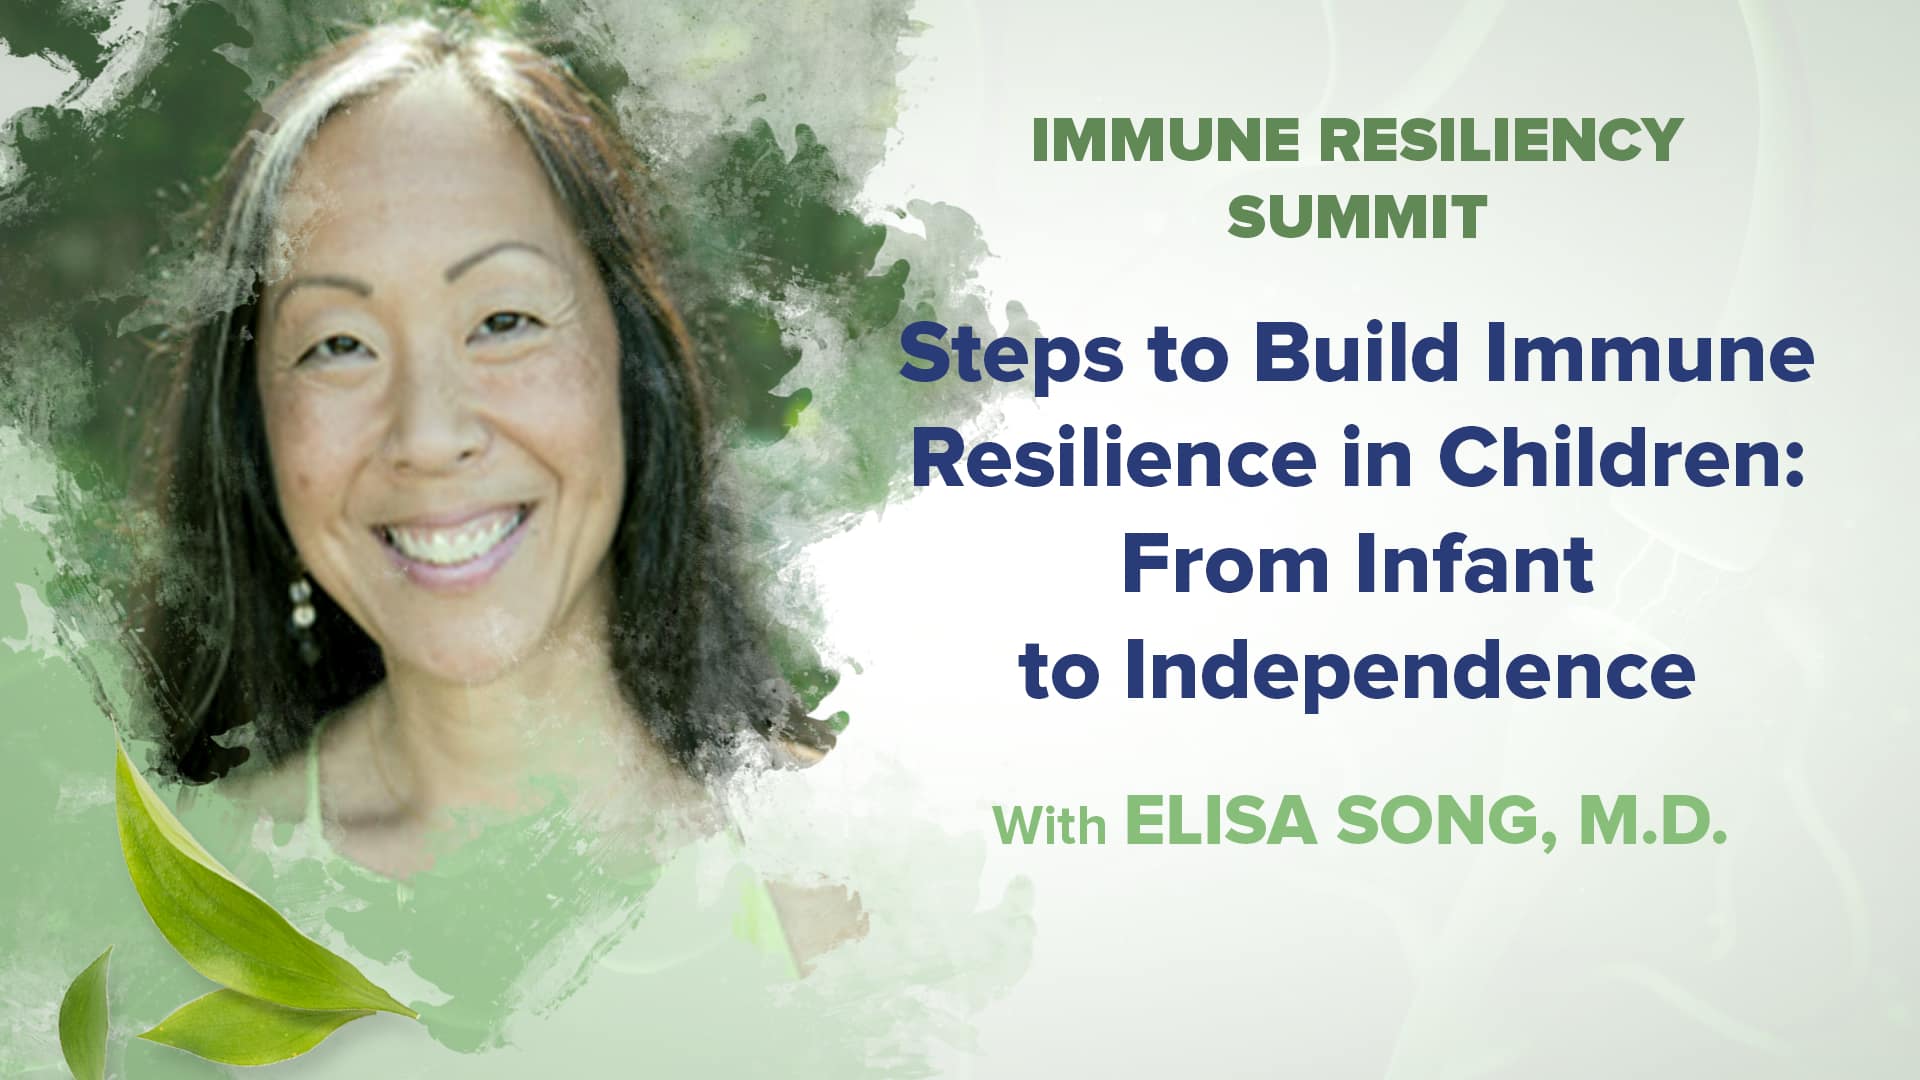 Steps to Build Immune Resilience in Children: From Infant to Independence